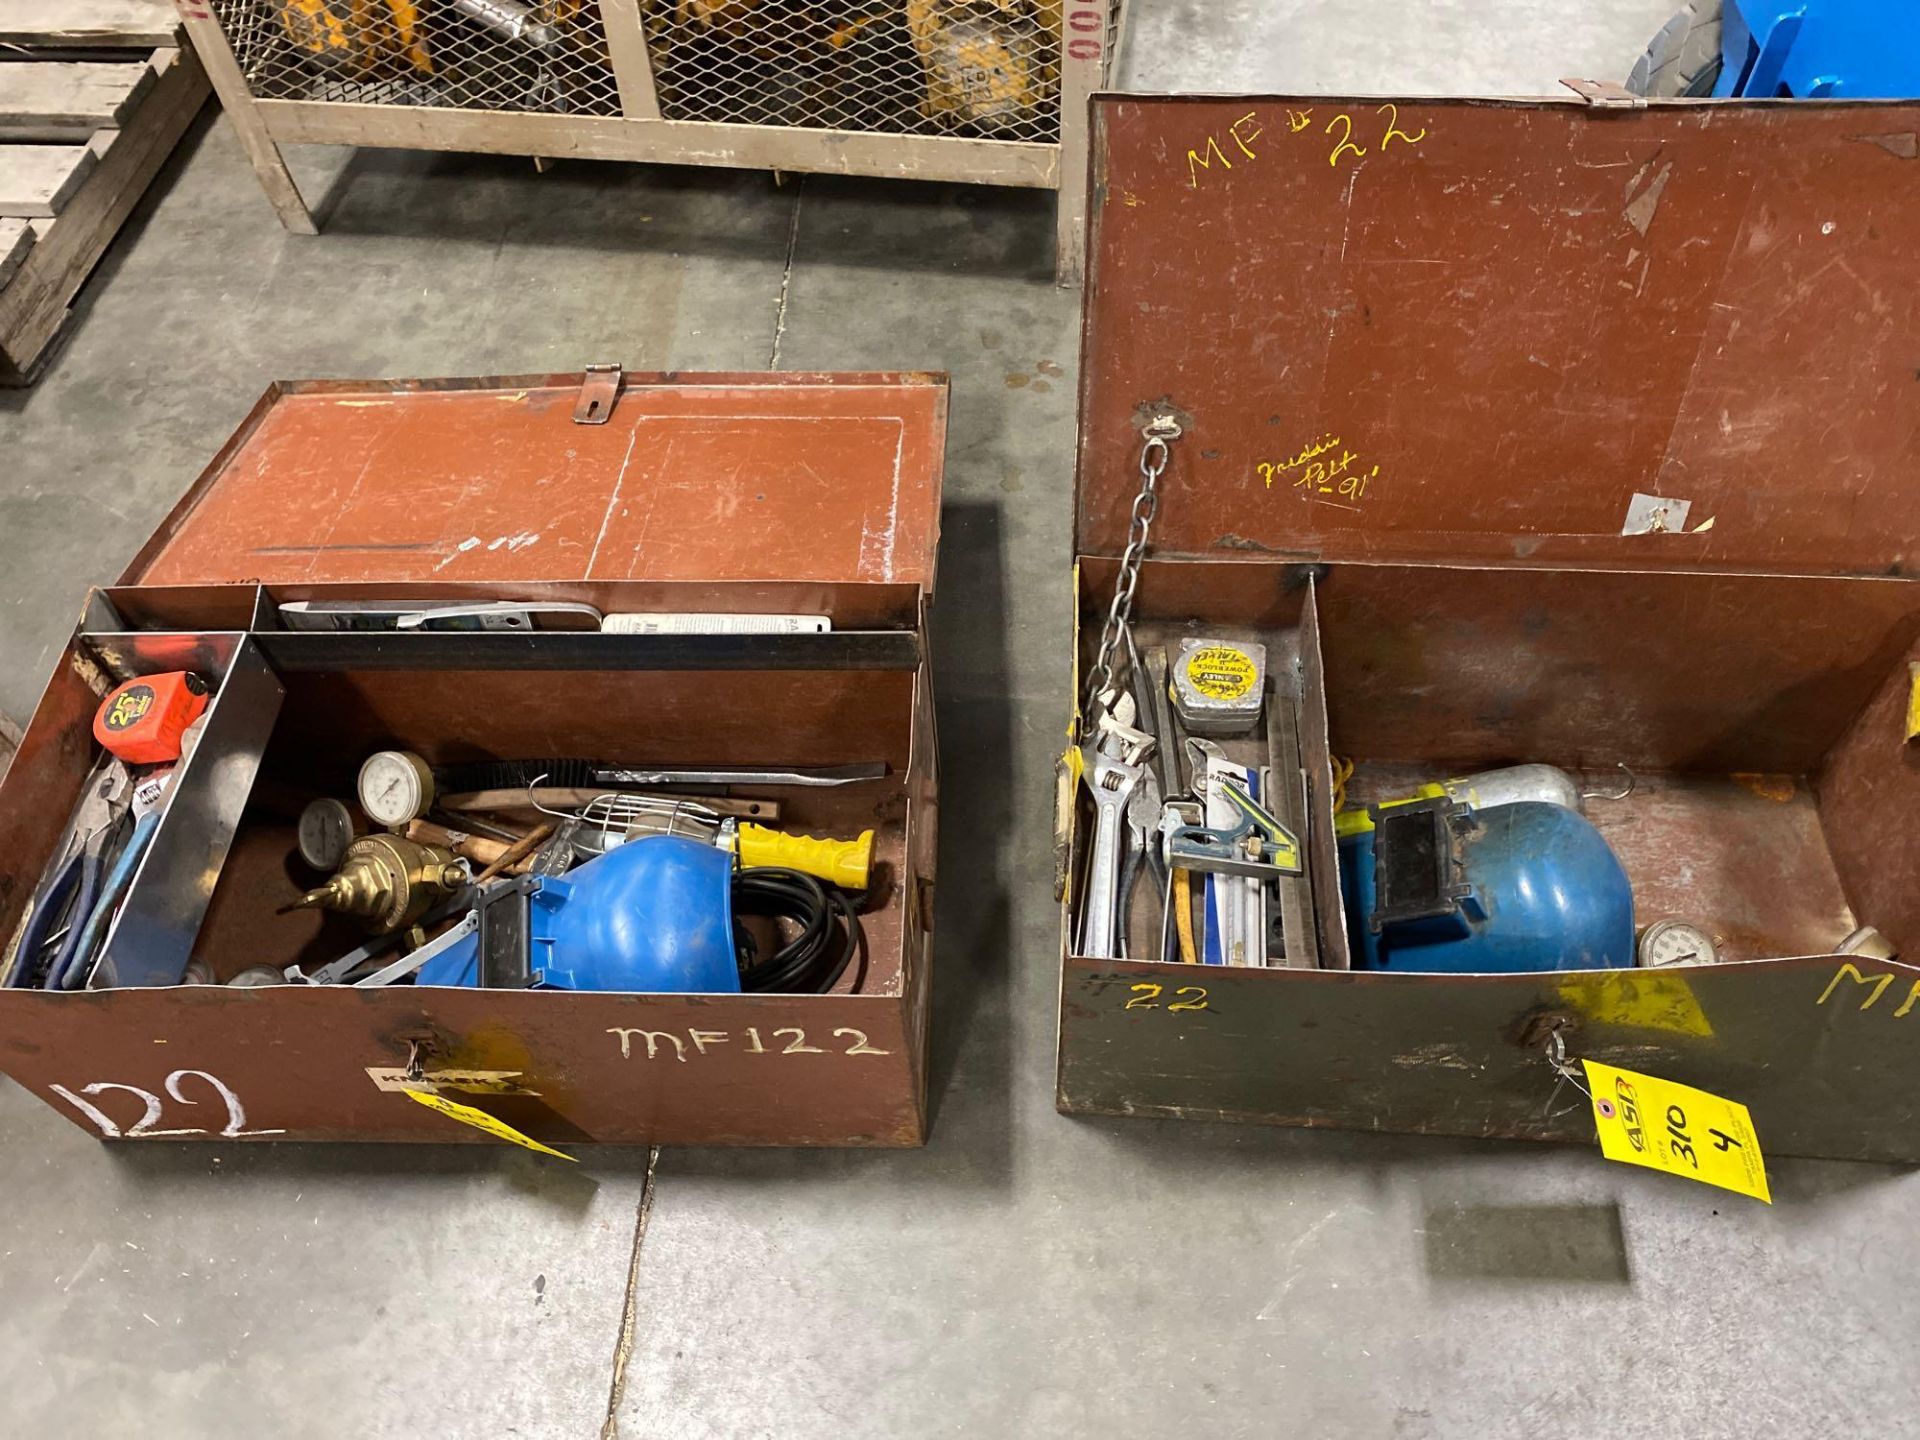 TWO KNACK BOXES WITH WELDING SUPPLIES